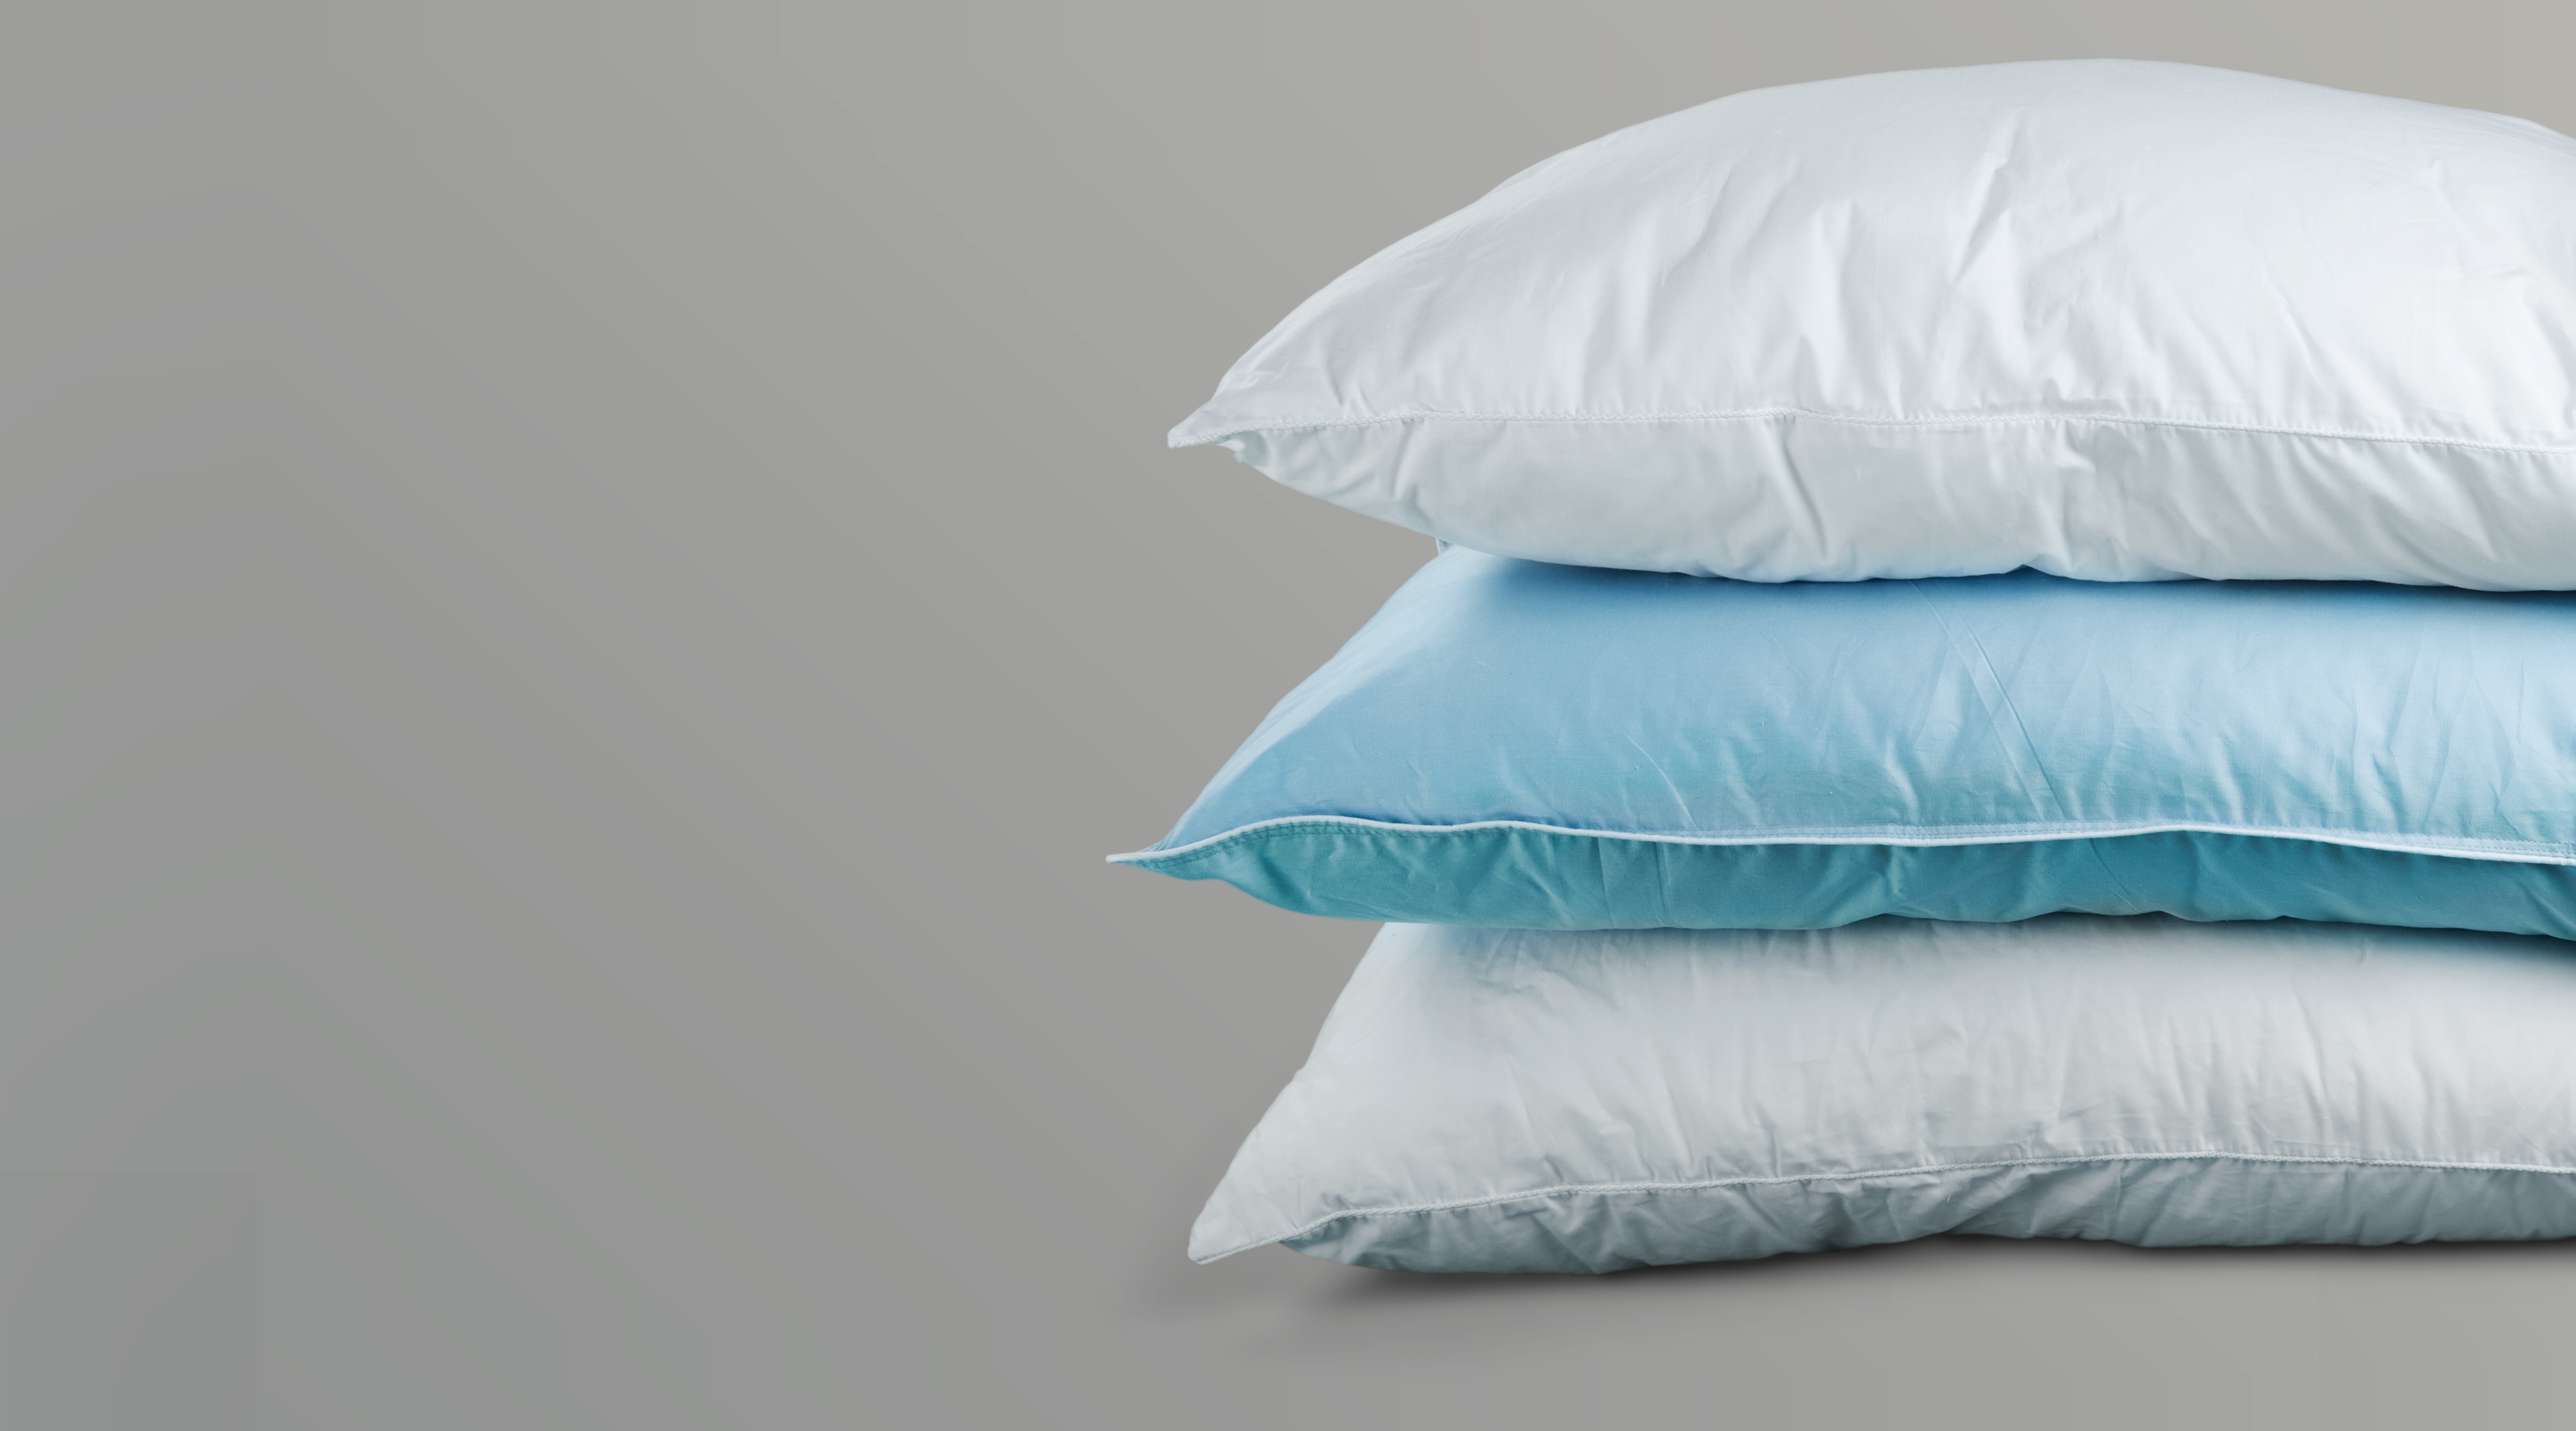 Stack of blue and white pillows